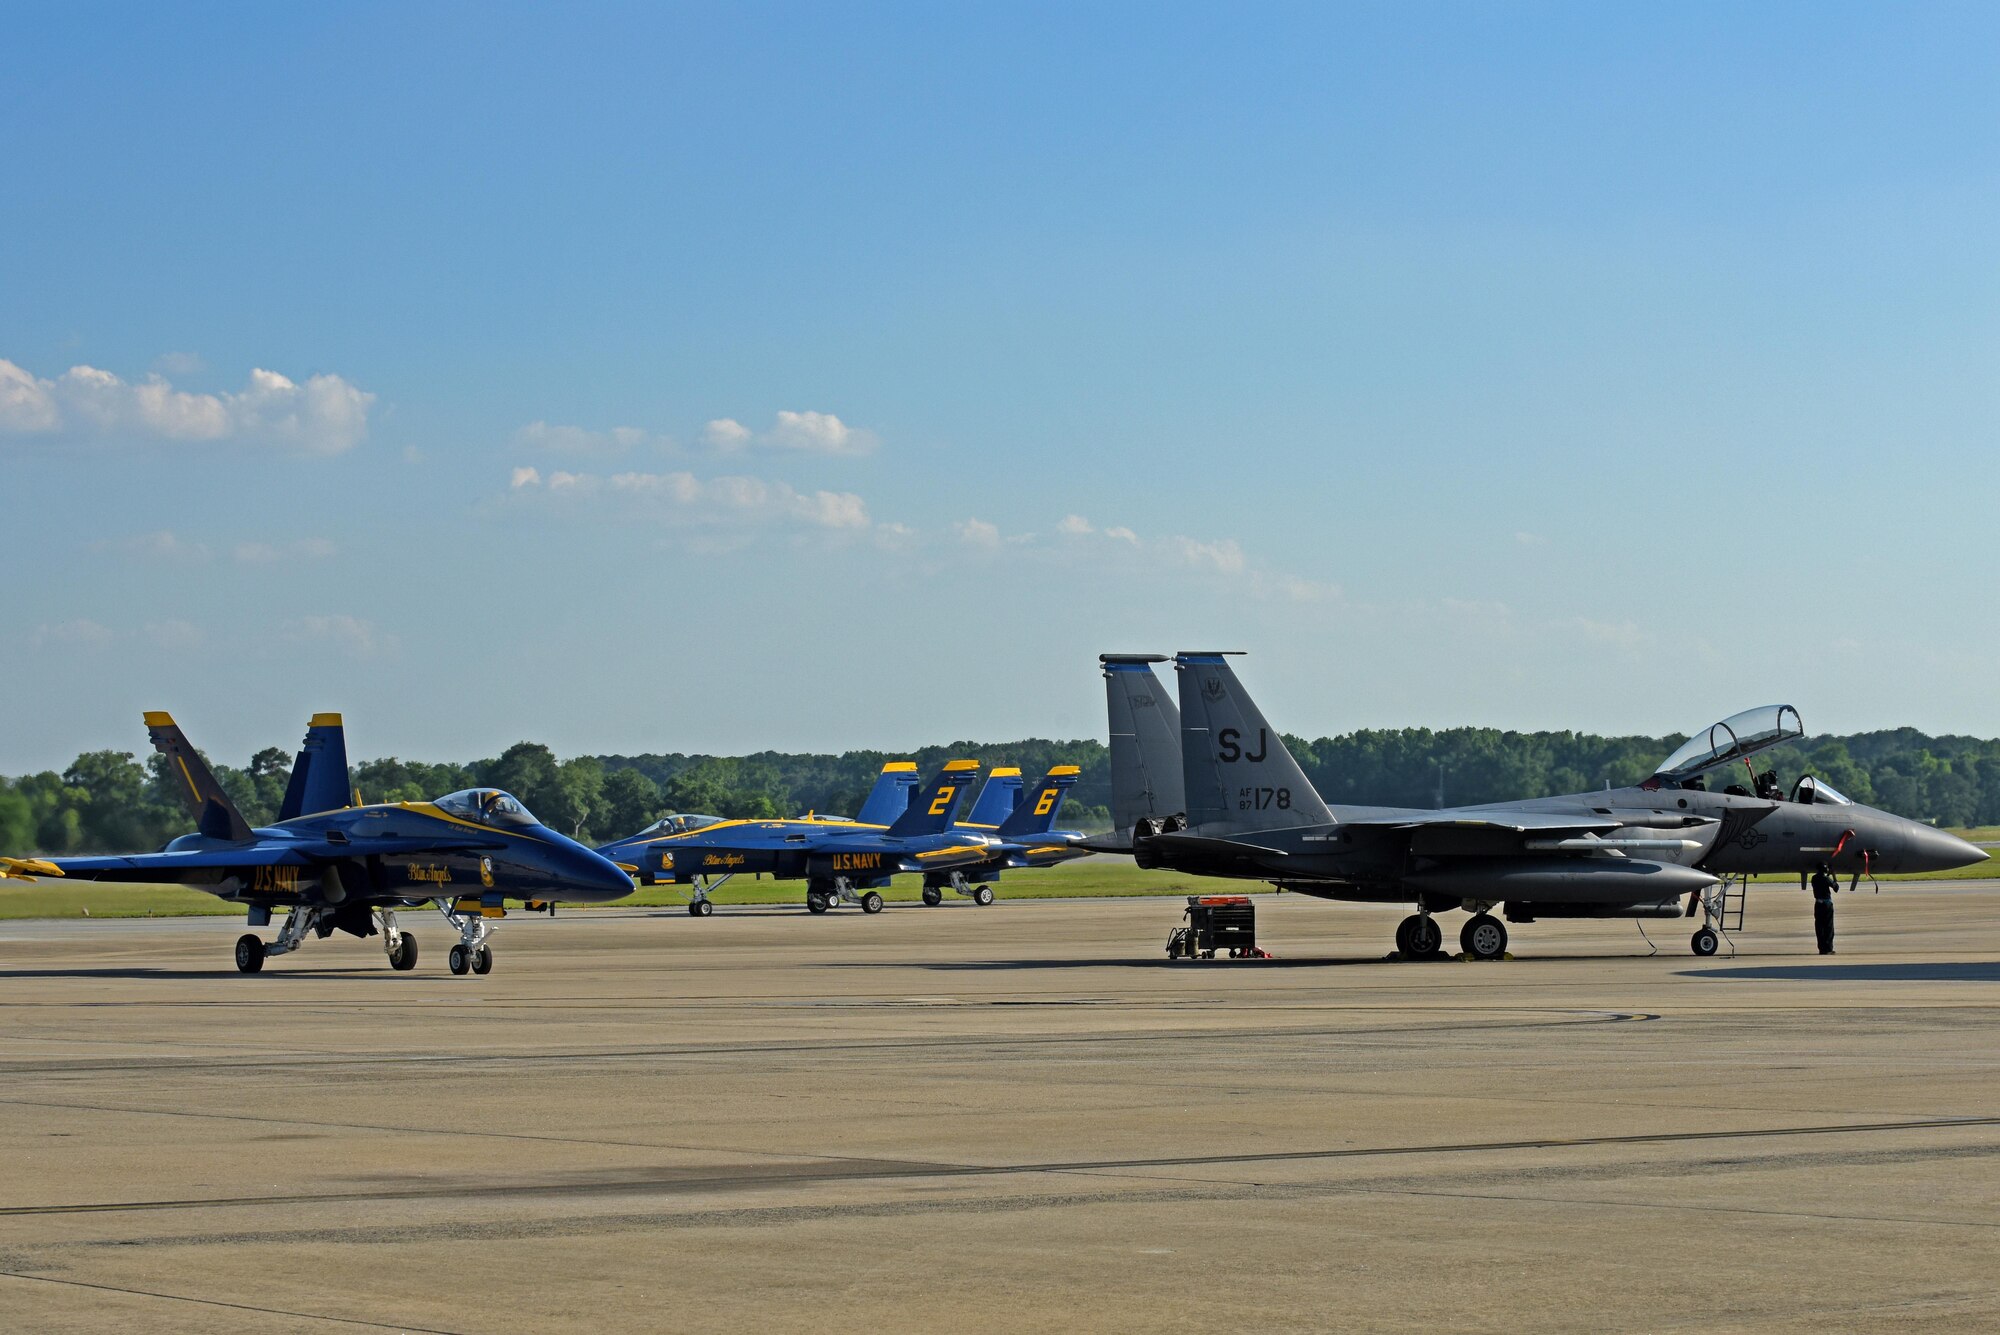 The U.S. Navy Blue Angels F/A-18 Hornets taxi after landing, May 17, 2017, at Seymour Johnson Air Force Base, North Carolina. The Blue Angels pilots will perform aerial stunts and routines during the Wings Over Wayne Air Show, May 20- 21. (U.S. Air Force photo by Senior Airman Ashley Maldonado)